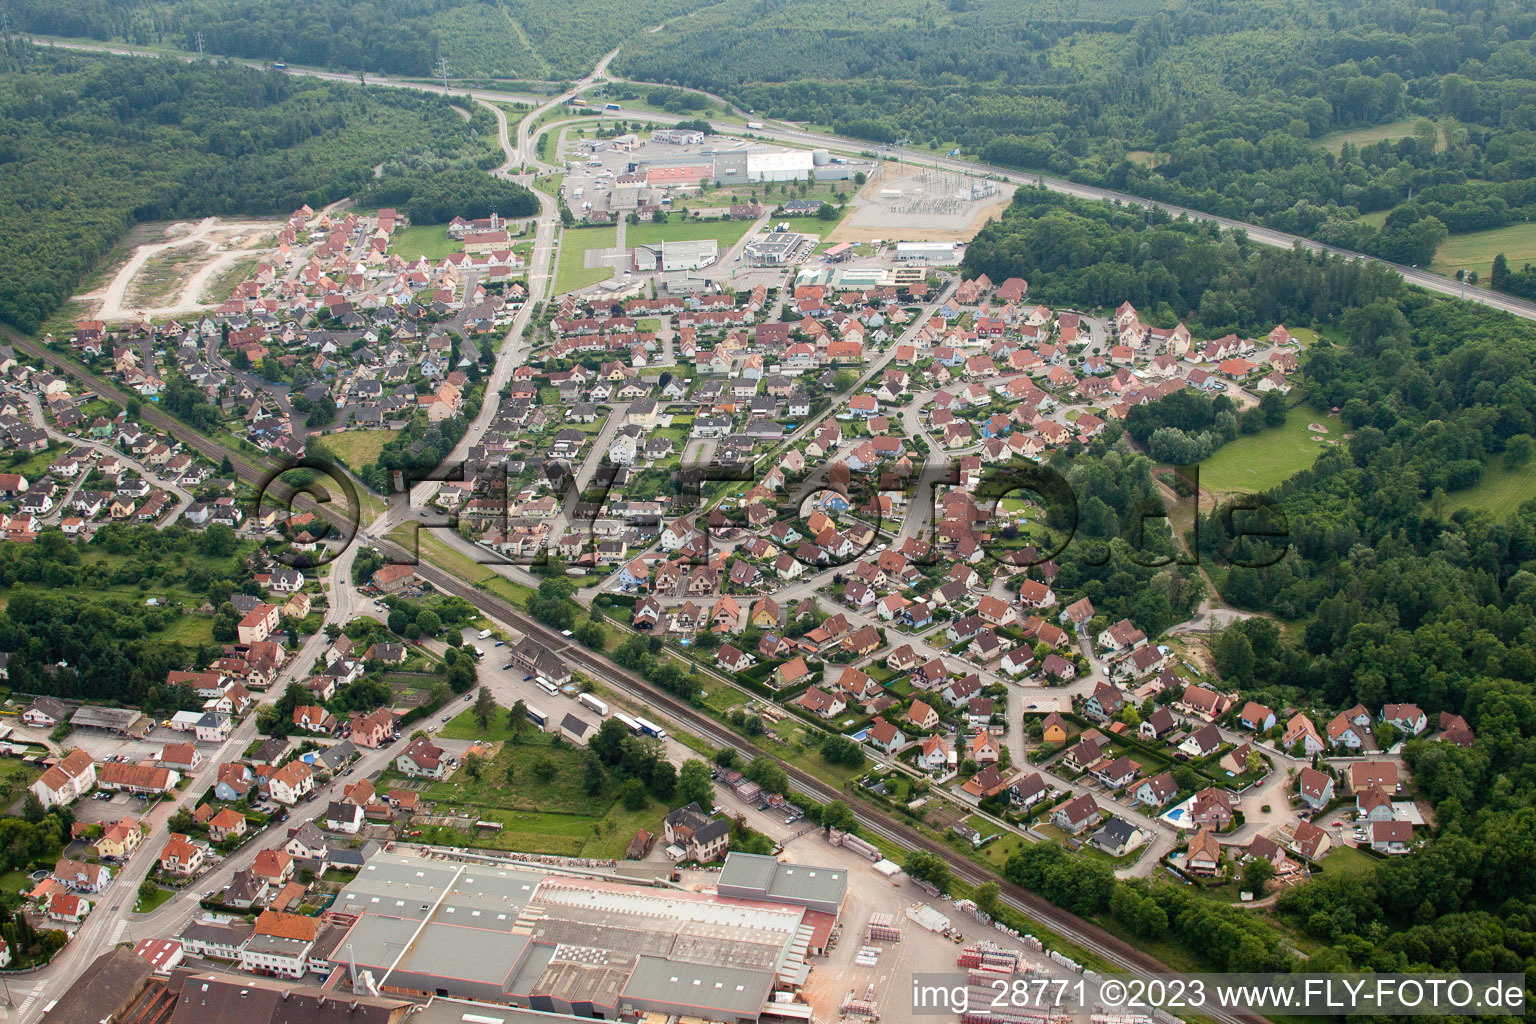 Seltz in the state Bas-Rhin, France viewn from the air